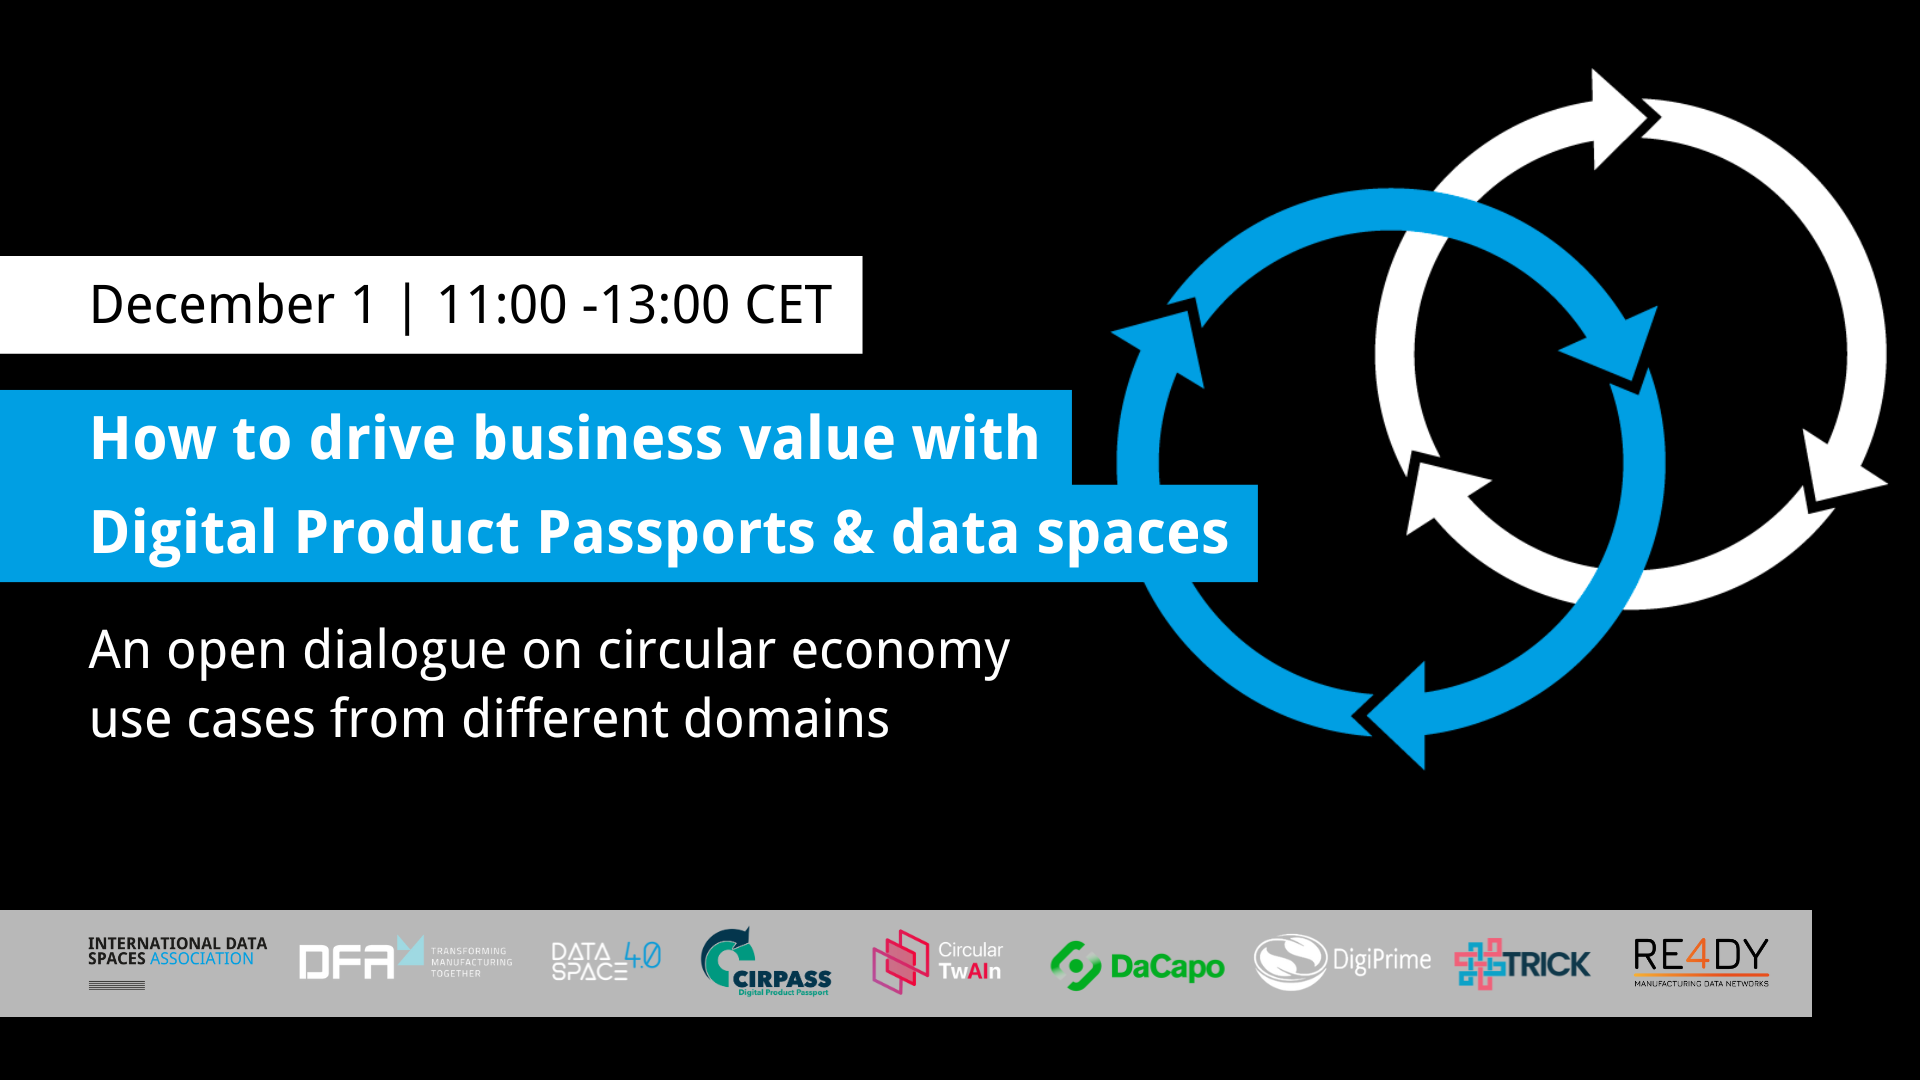 How to drive business value with Digital Product Passports & data spaces